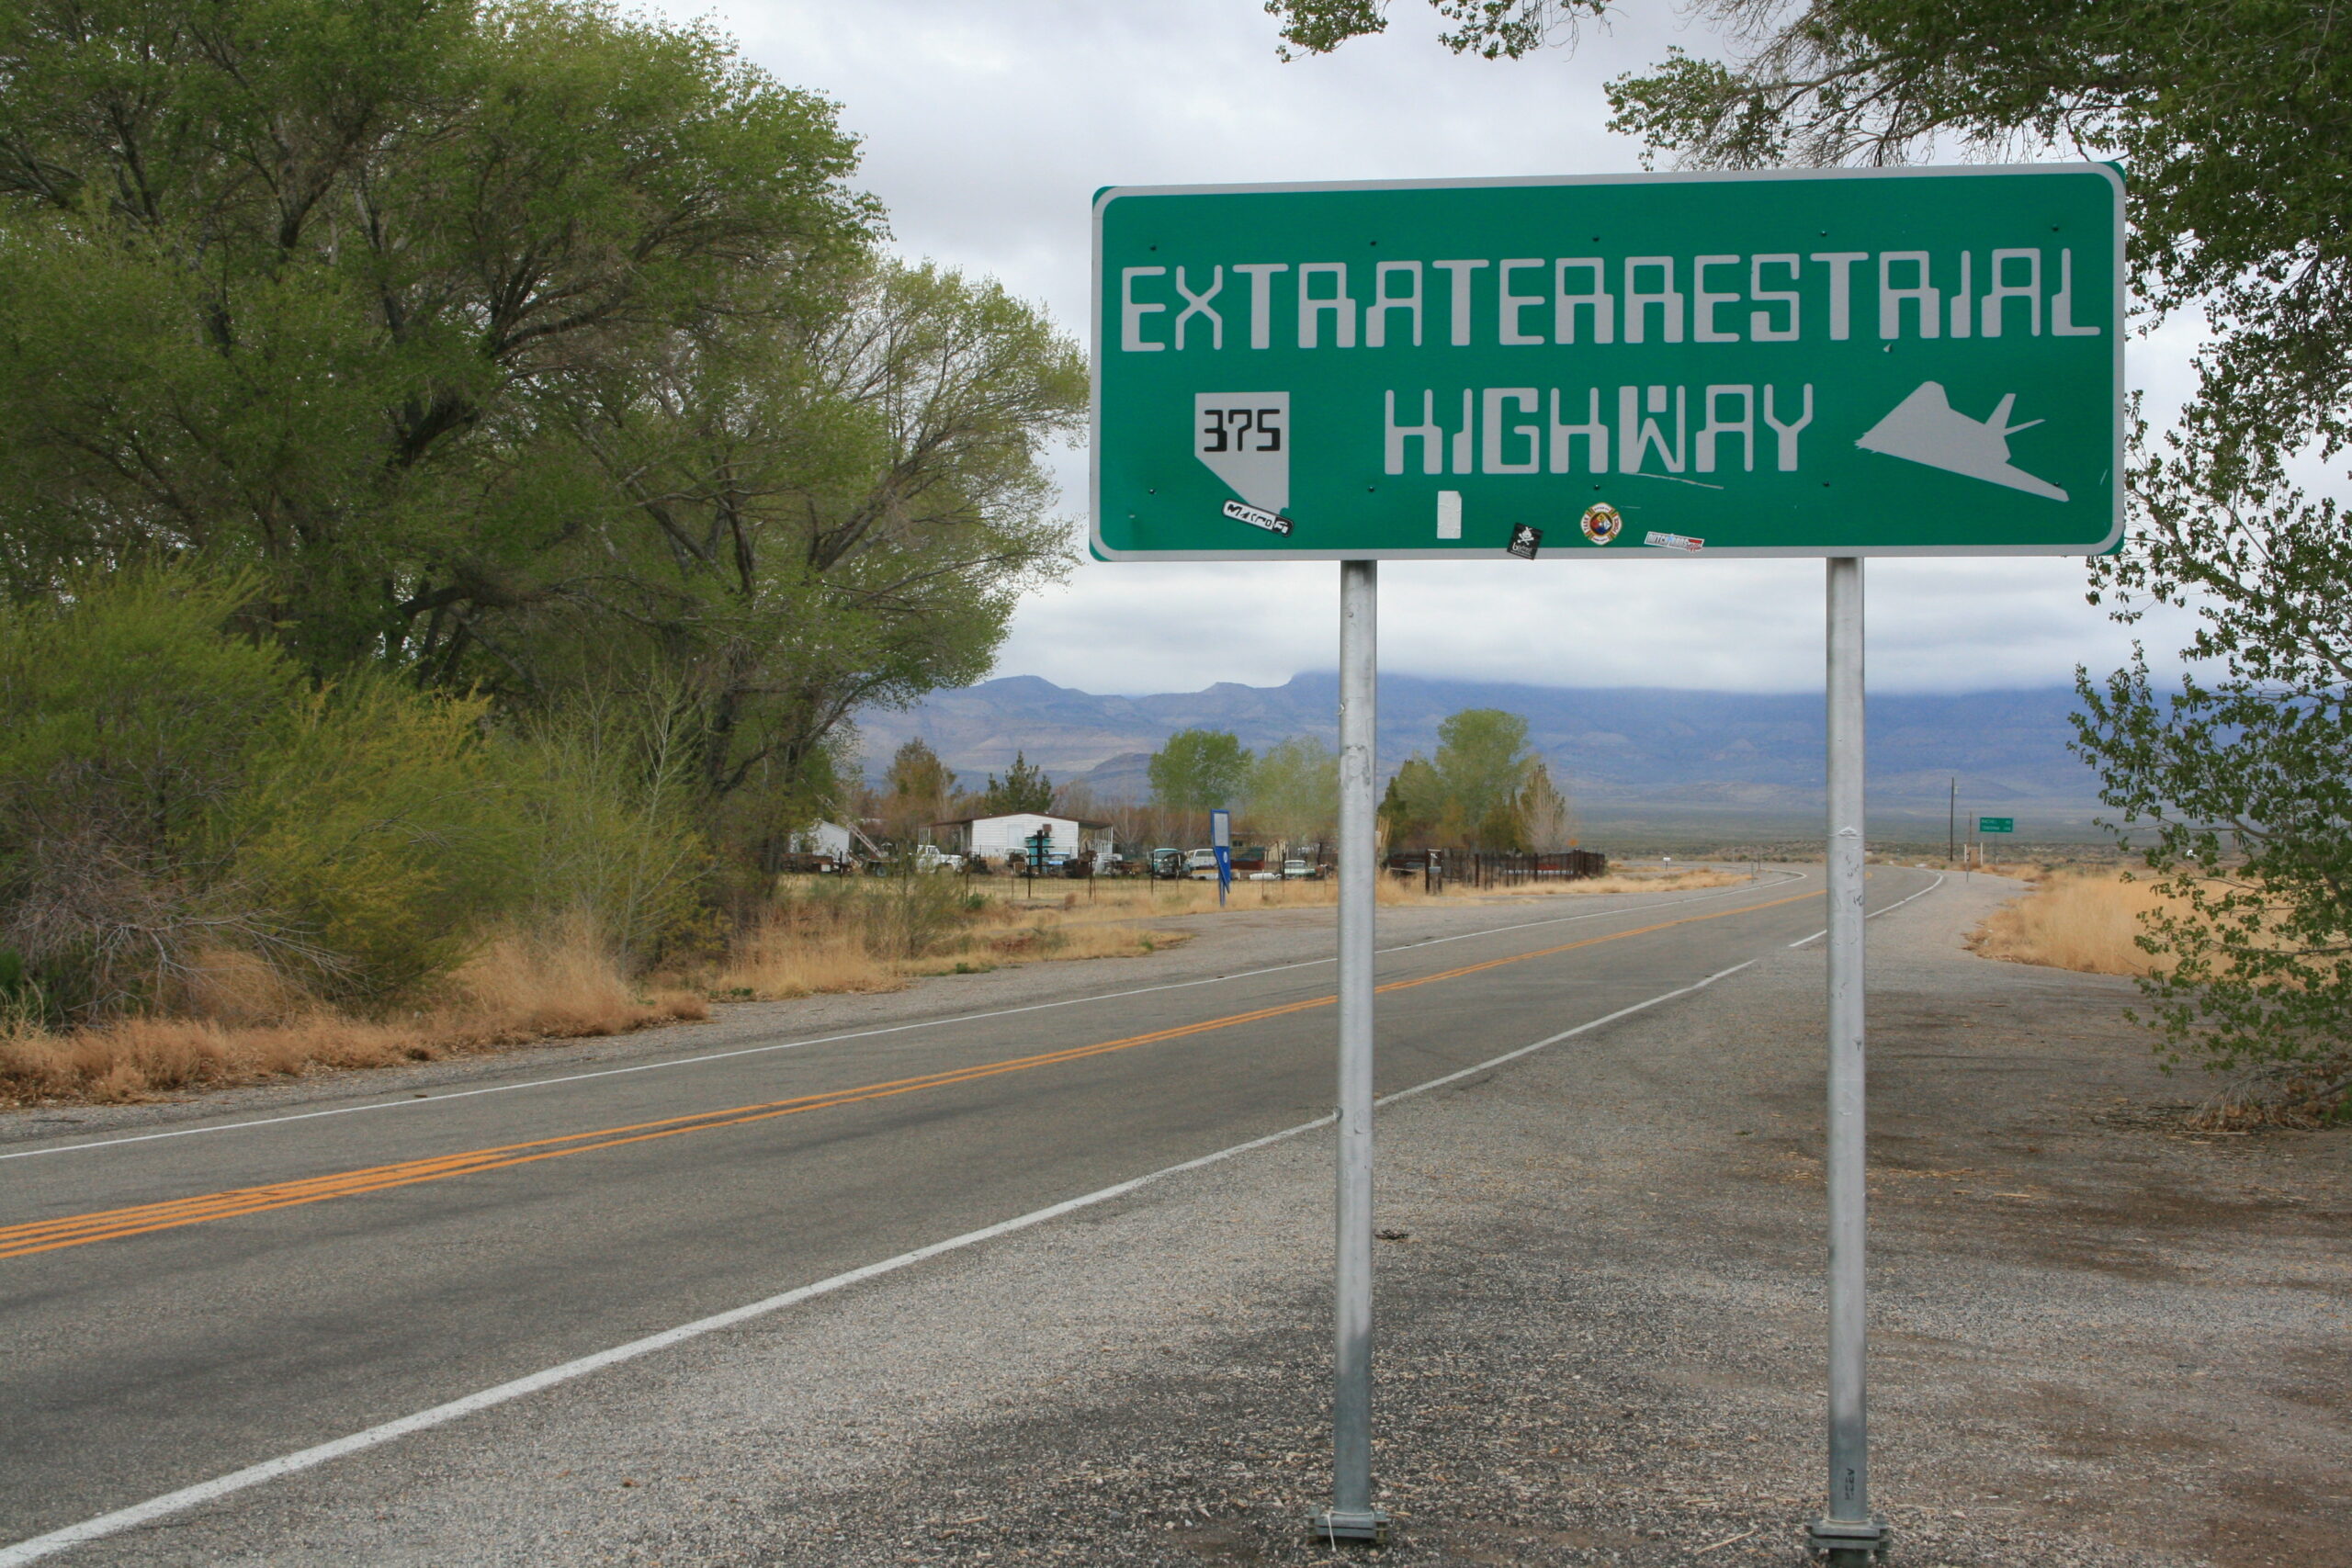 The sign for the Extraterrestrial Highway.